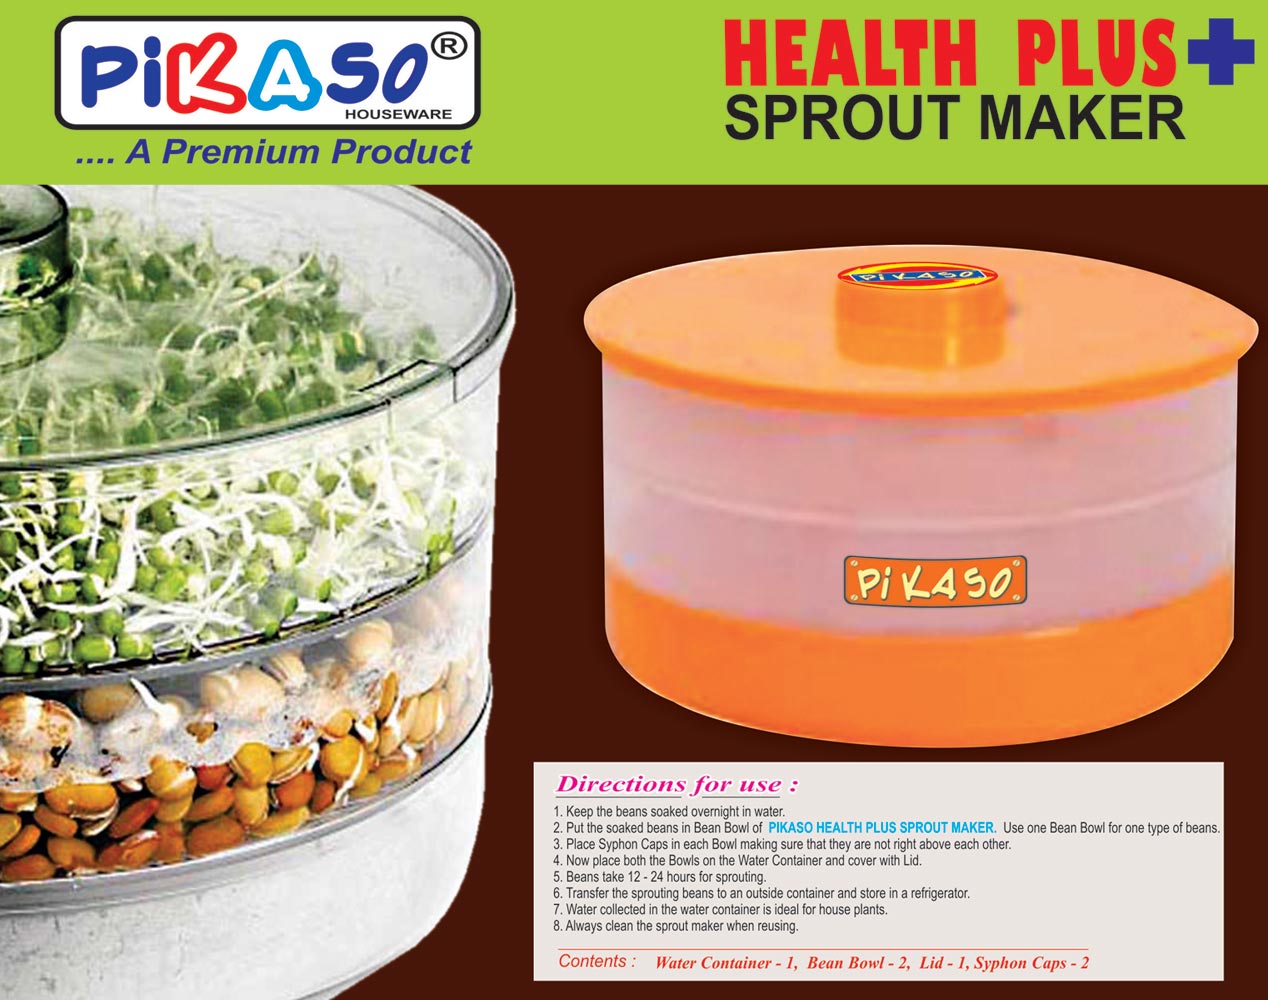 Sprout Maker